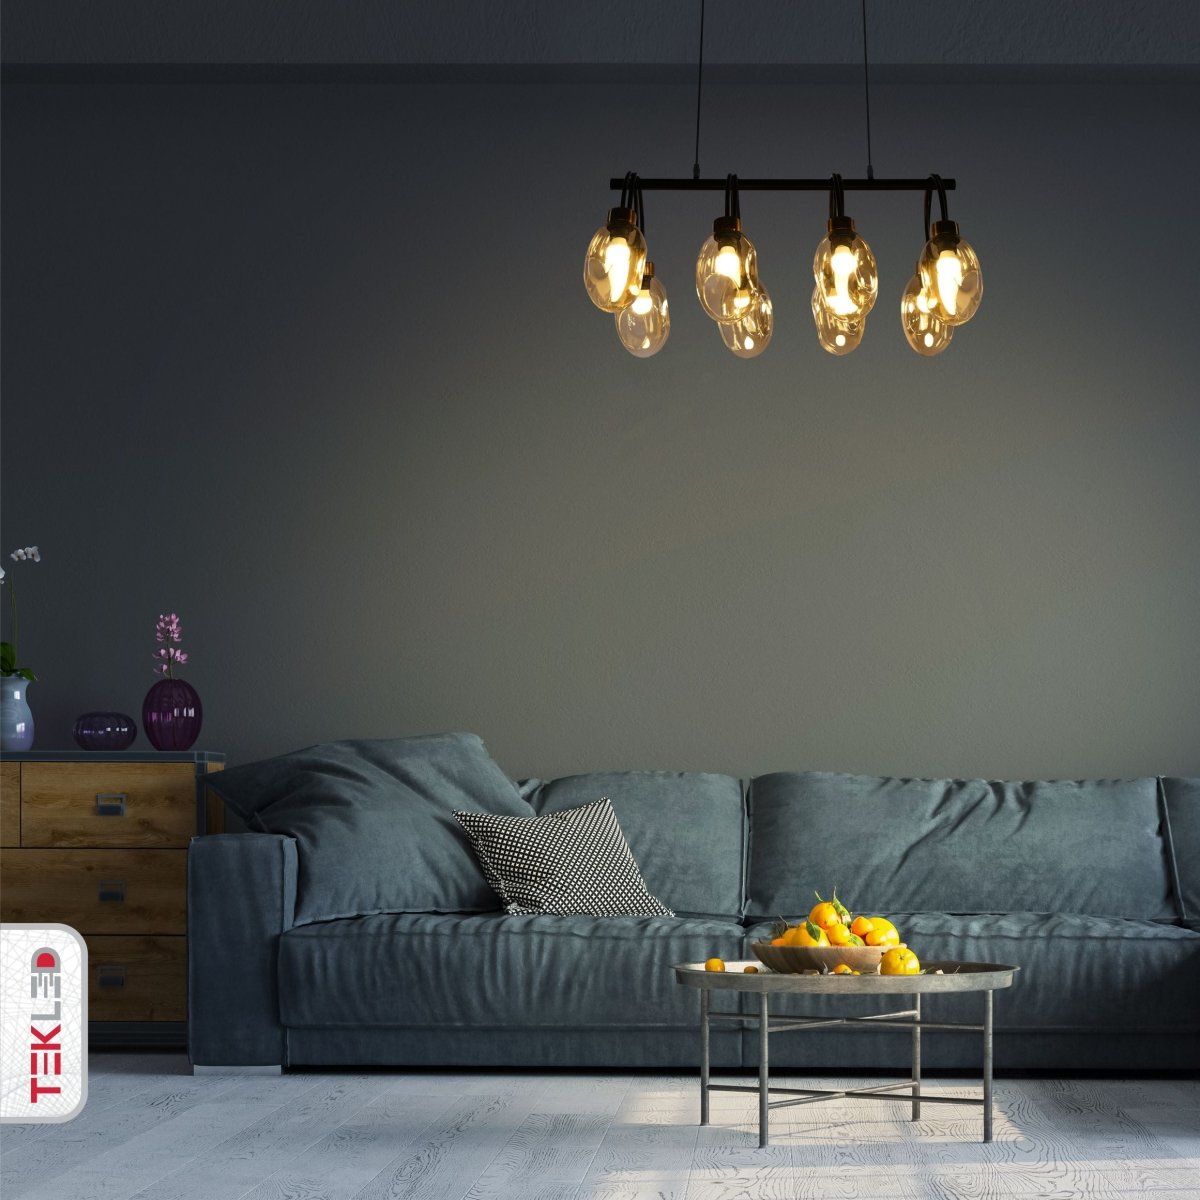 Indoor usage of Amber Glass Black Metal Island Chandelier with 8xE27 Fitting | TEKLED 158-19574